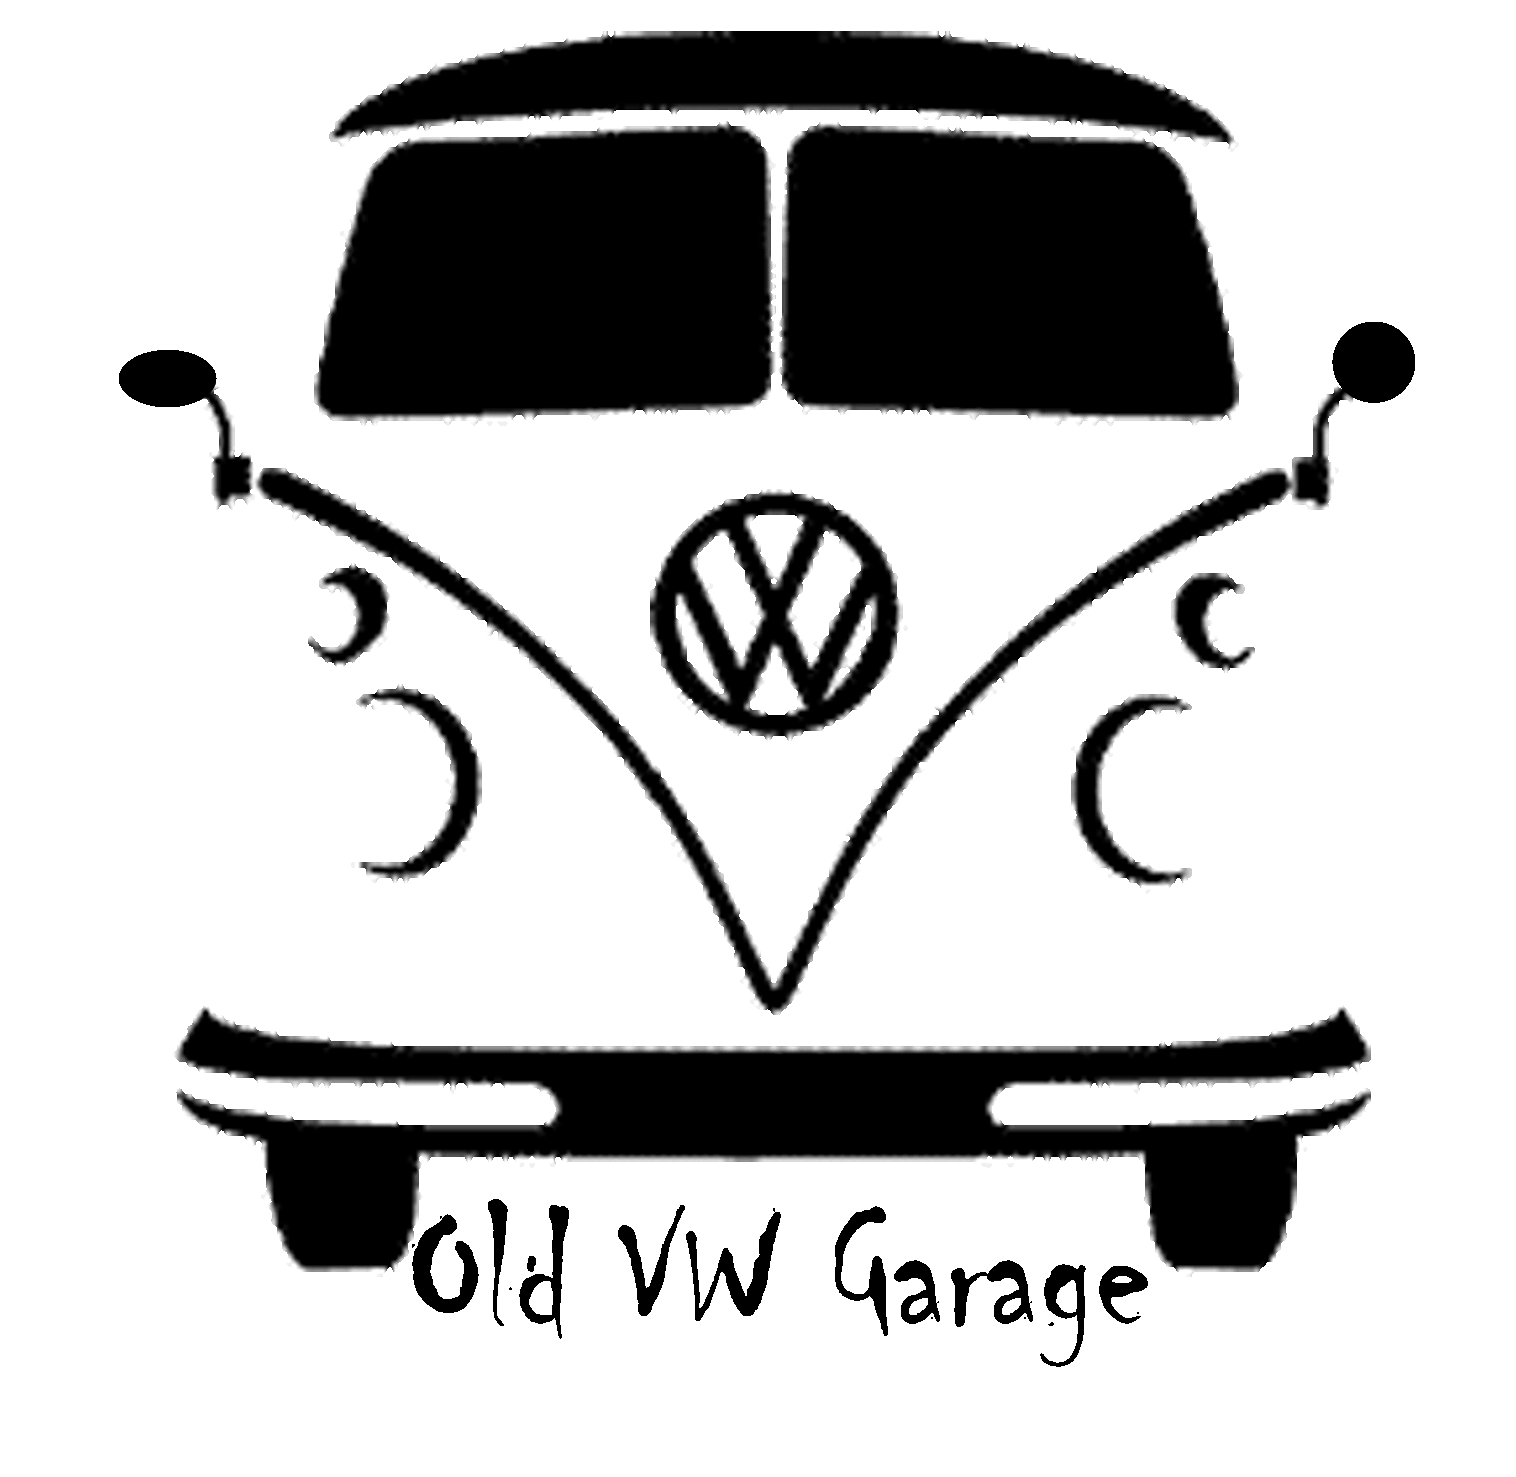 Volkswagen Bus Logo - Pin by Ken Rybczyk on Products I Love | Pinterest | Vw bus, Cars and ...